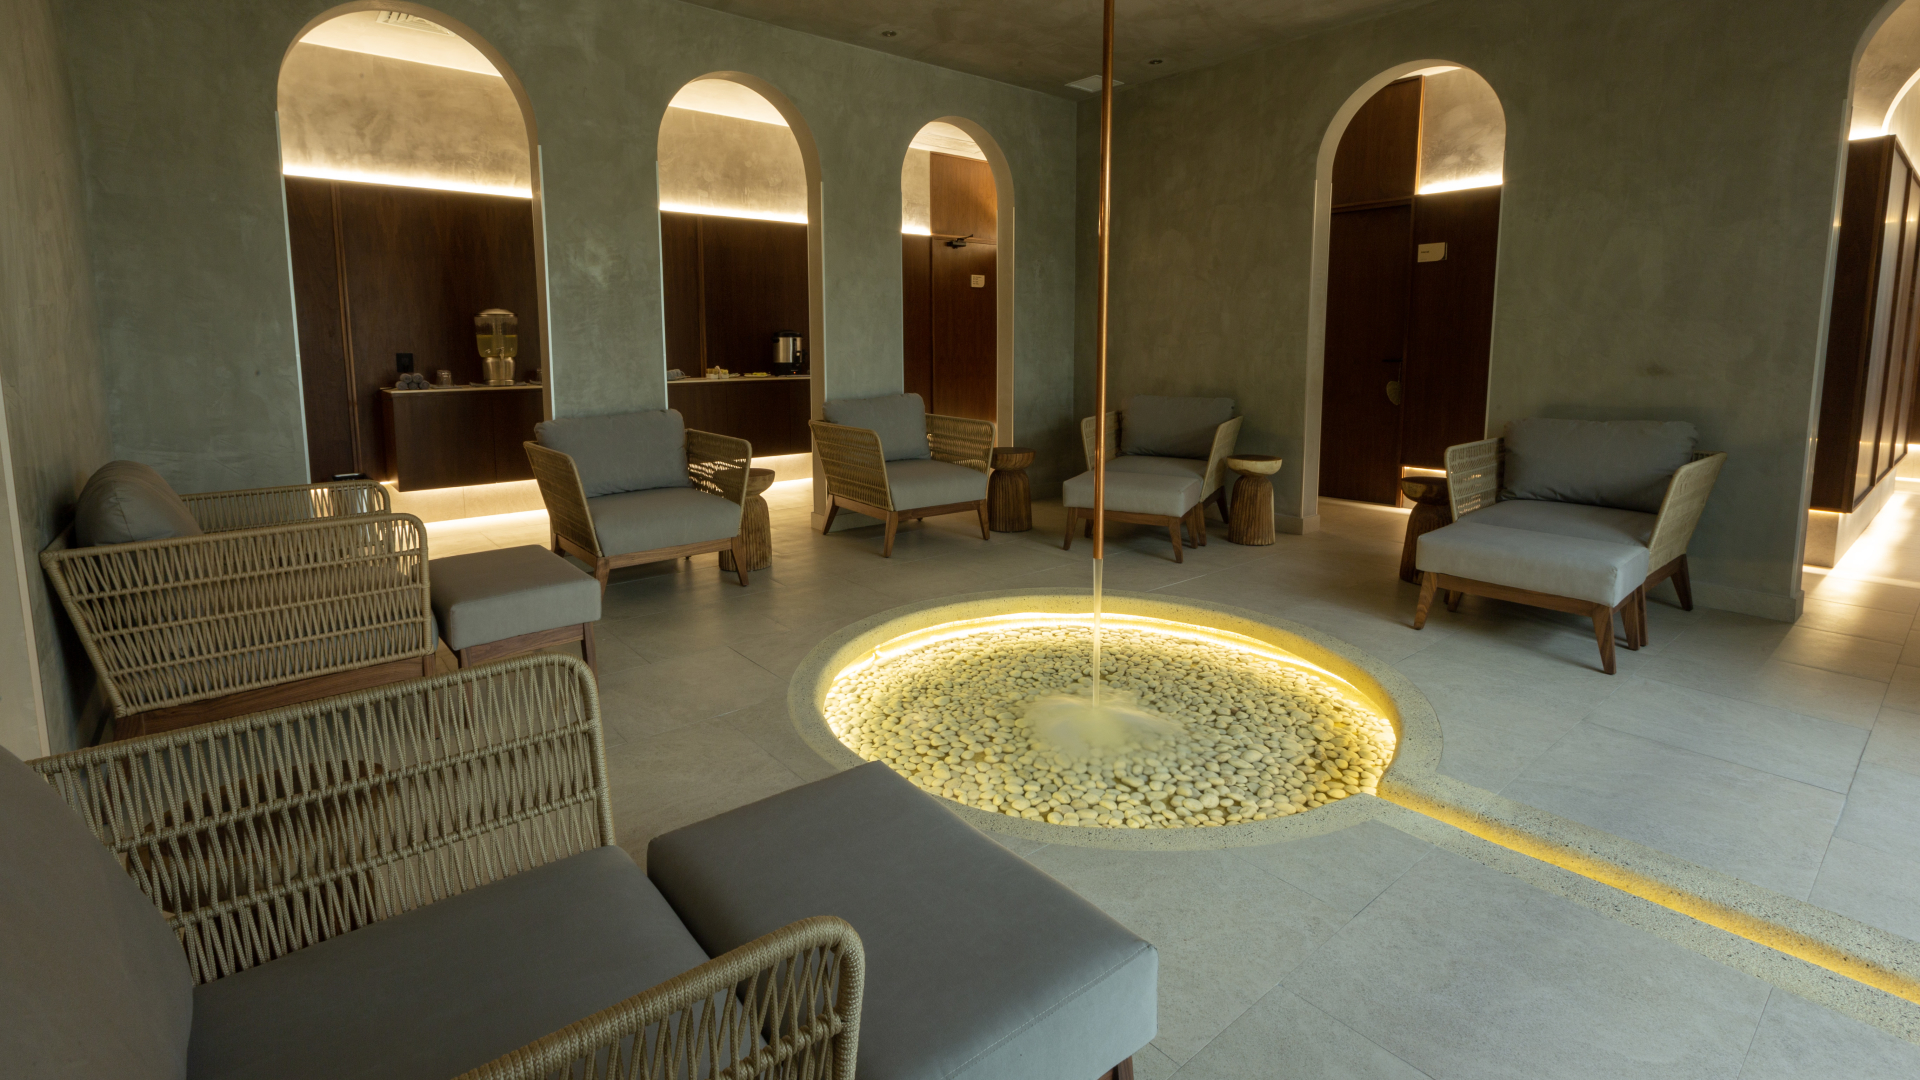 Spa area with comfortable seating and water feature